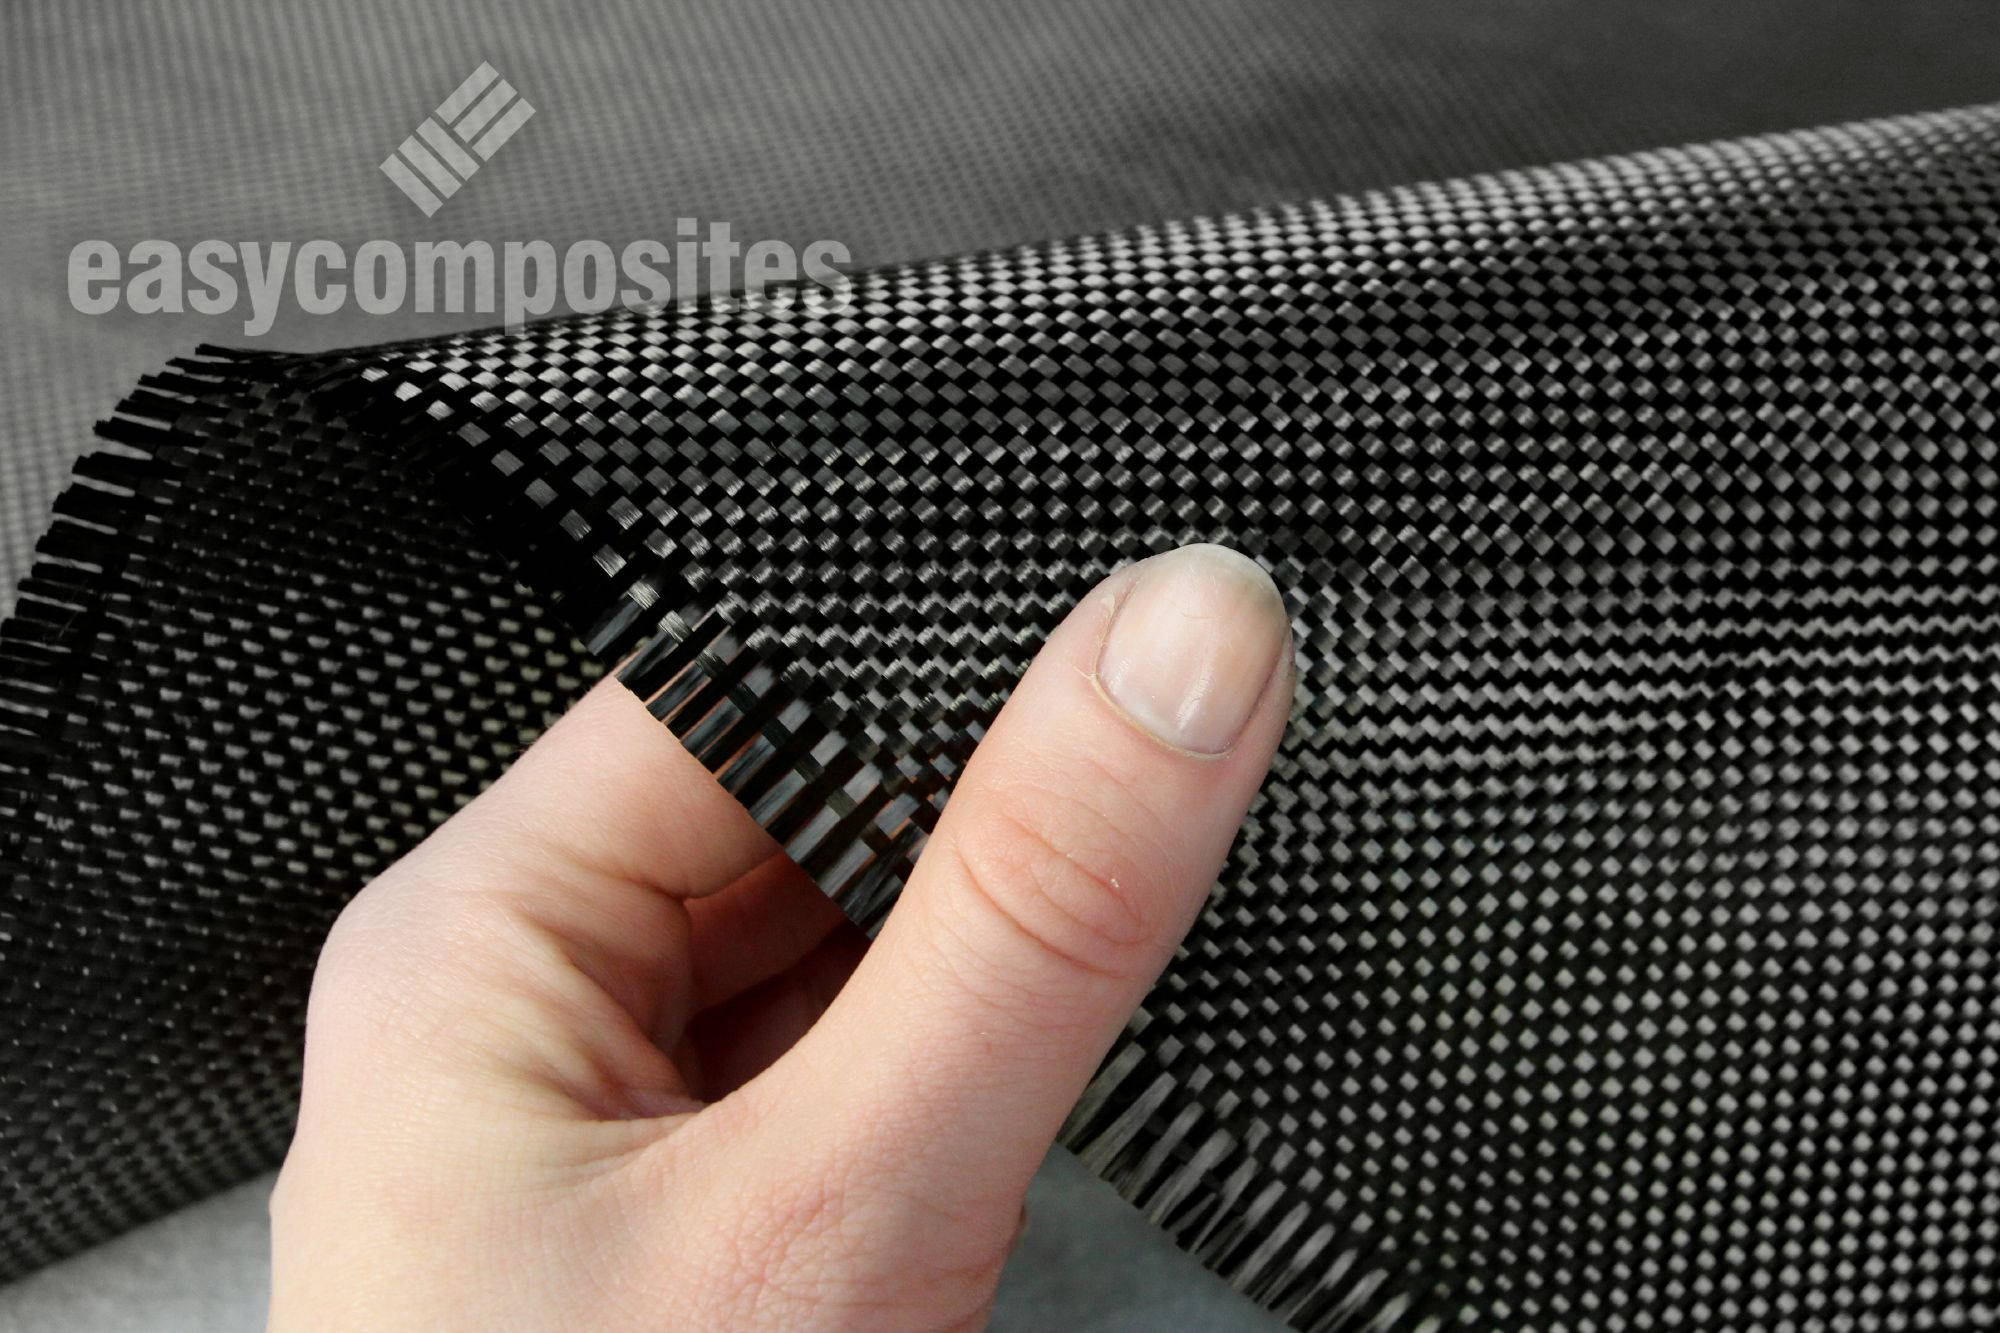 https://media.easycomposites.co.uk/products/extralarge/CF-PW-210-210g-plain-weave-3k-carbon-fibre-in-hand-closup.jpg